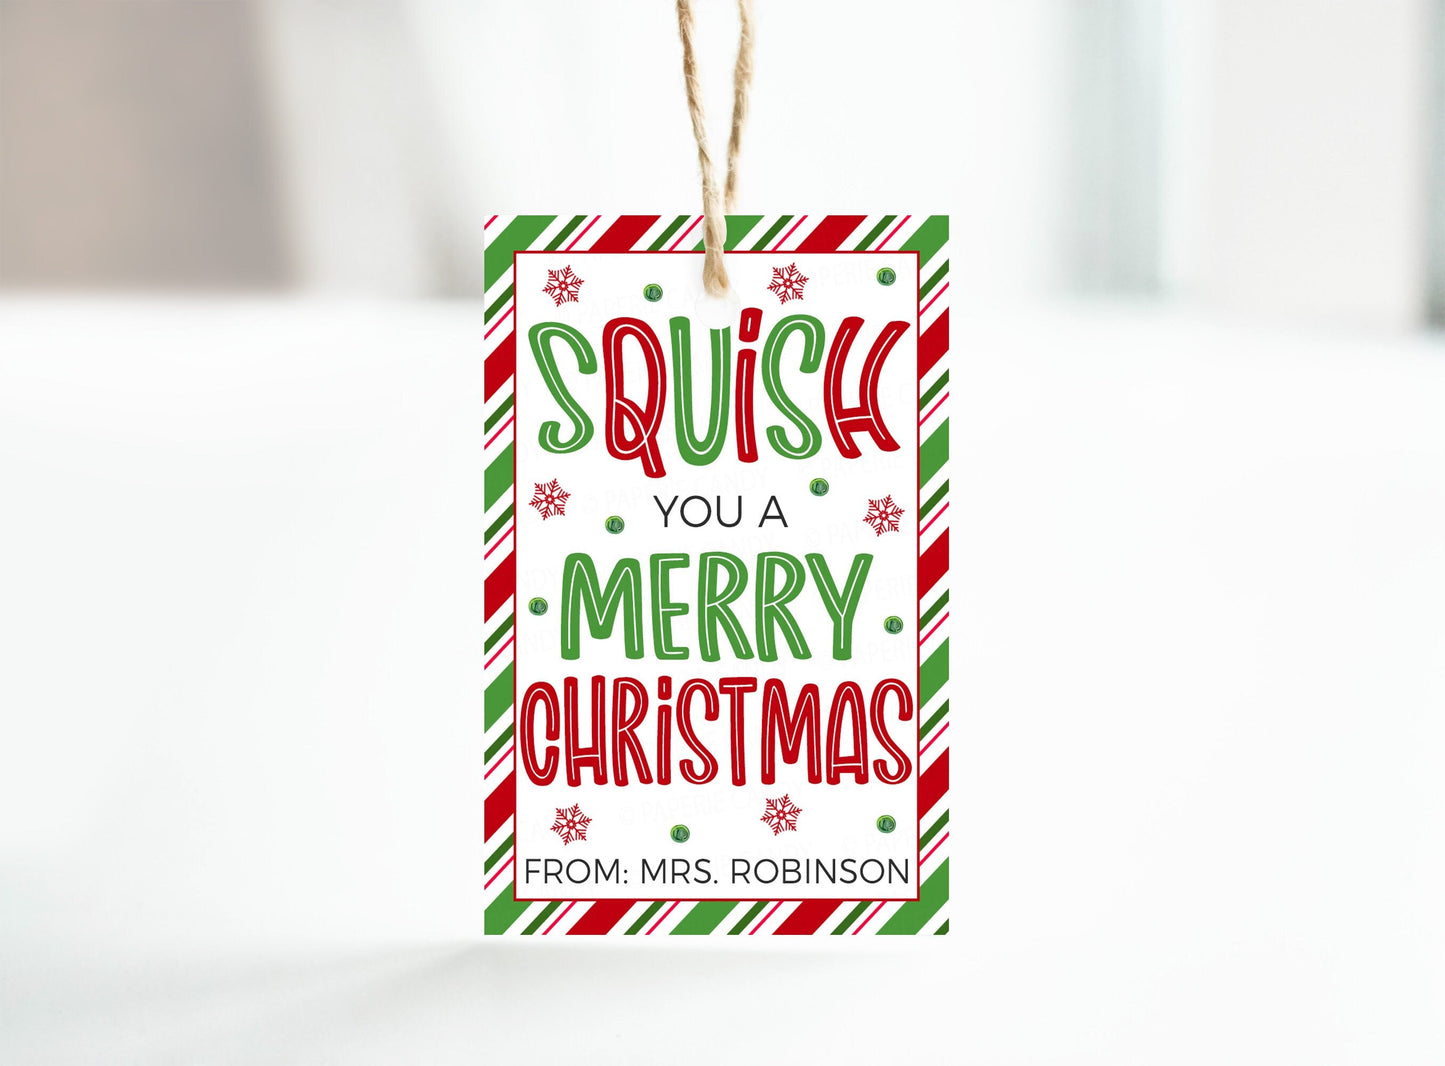 Christmas Squishies Gift Tag, Squish You A Merry Christmas, Gift For Classmates Students, Stocking Stuffer Squishy Squeeze Toy, Printable